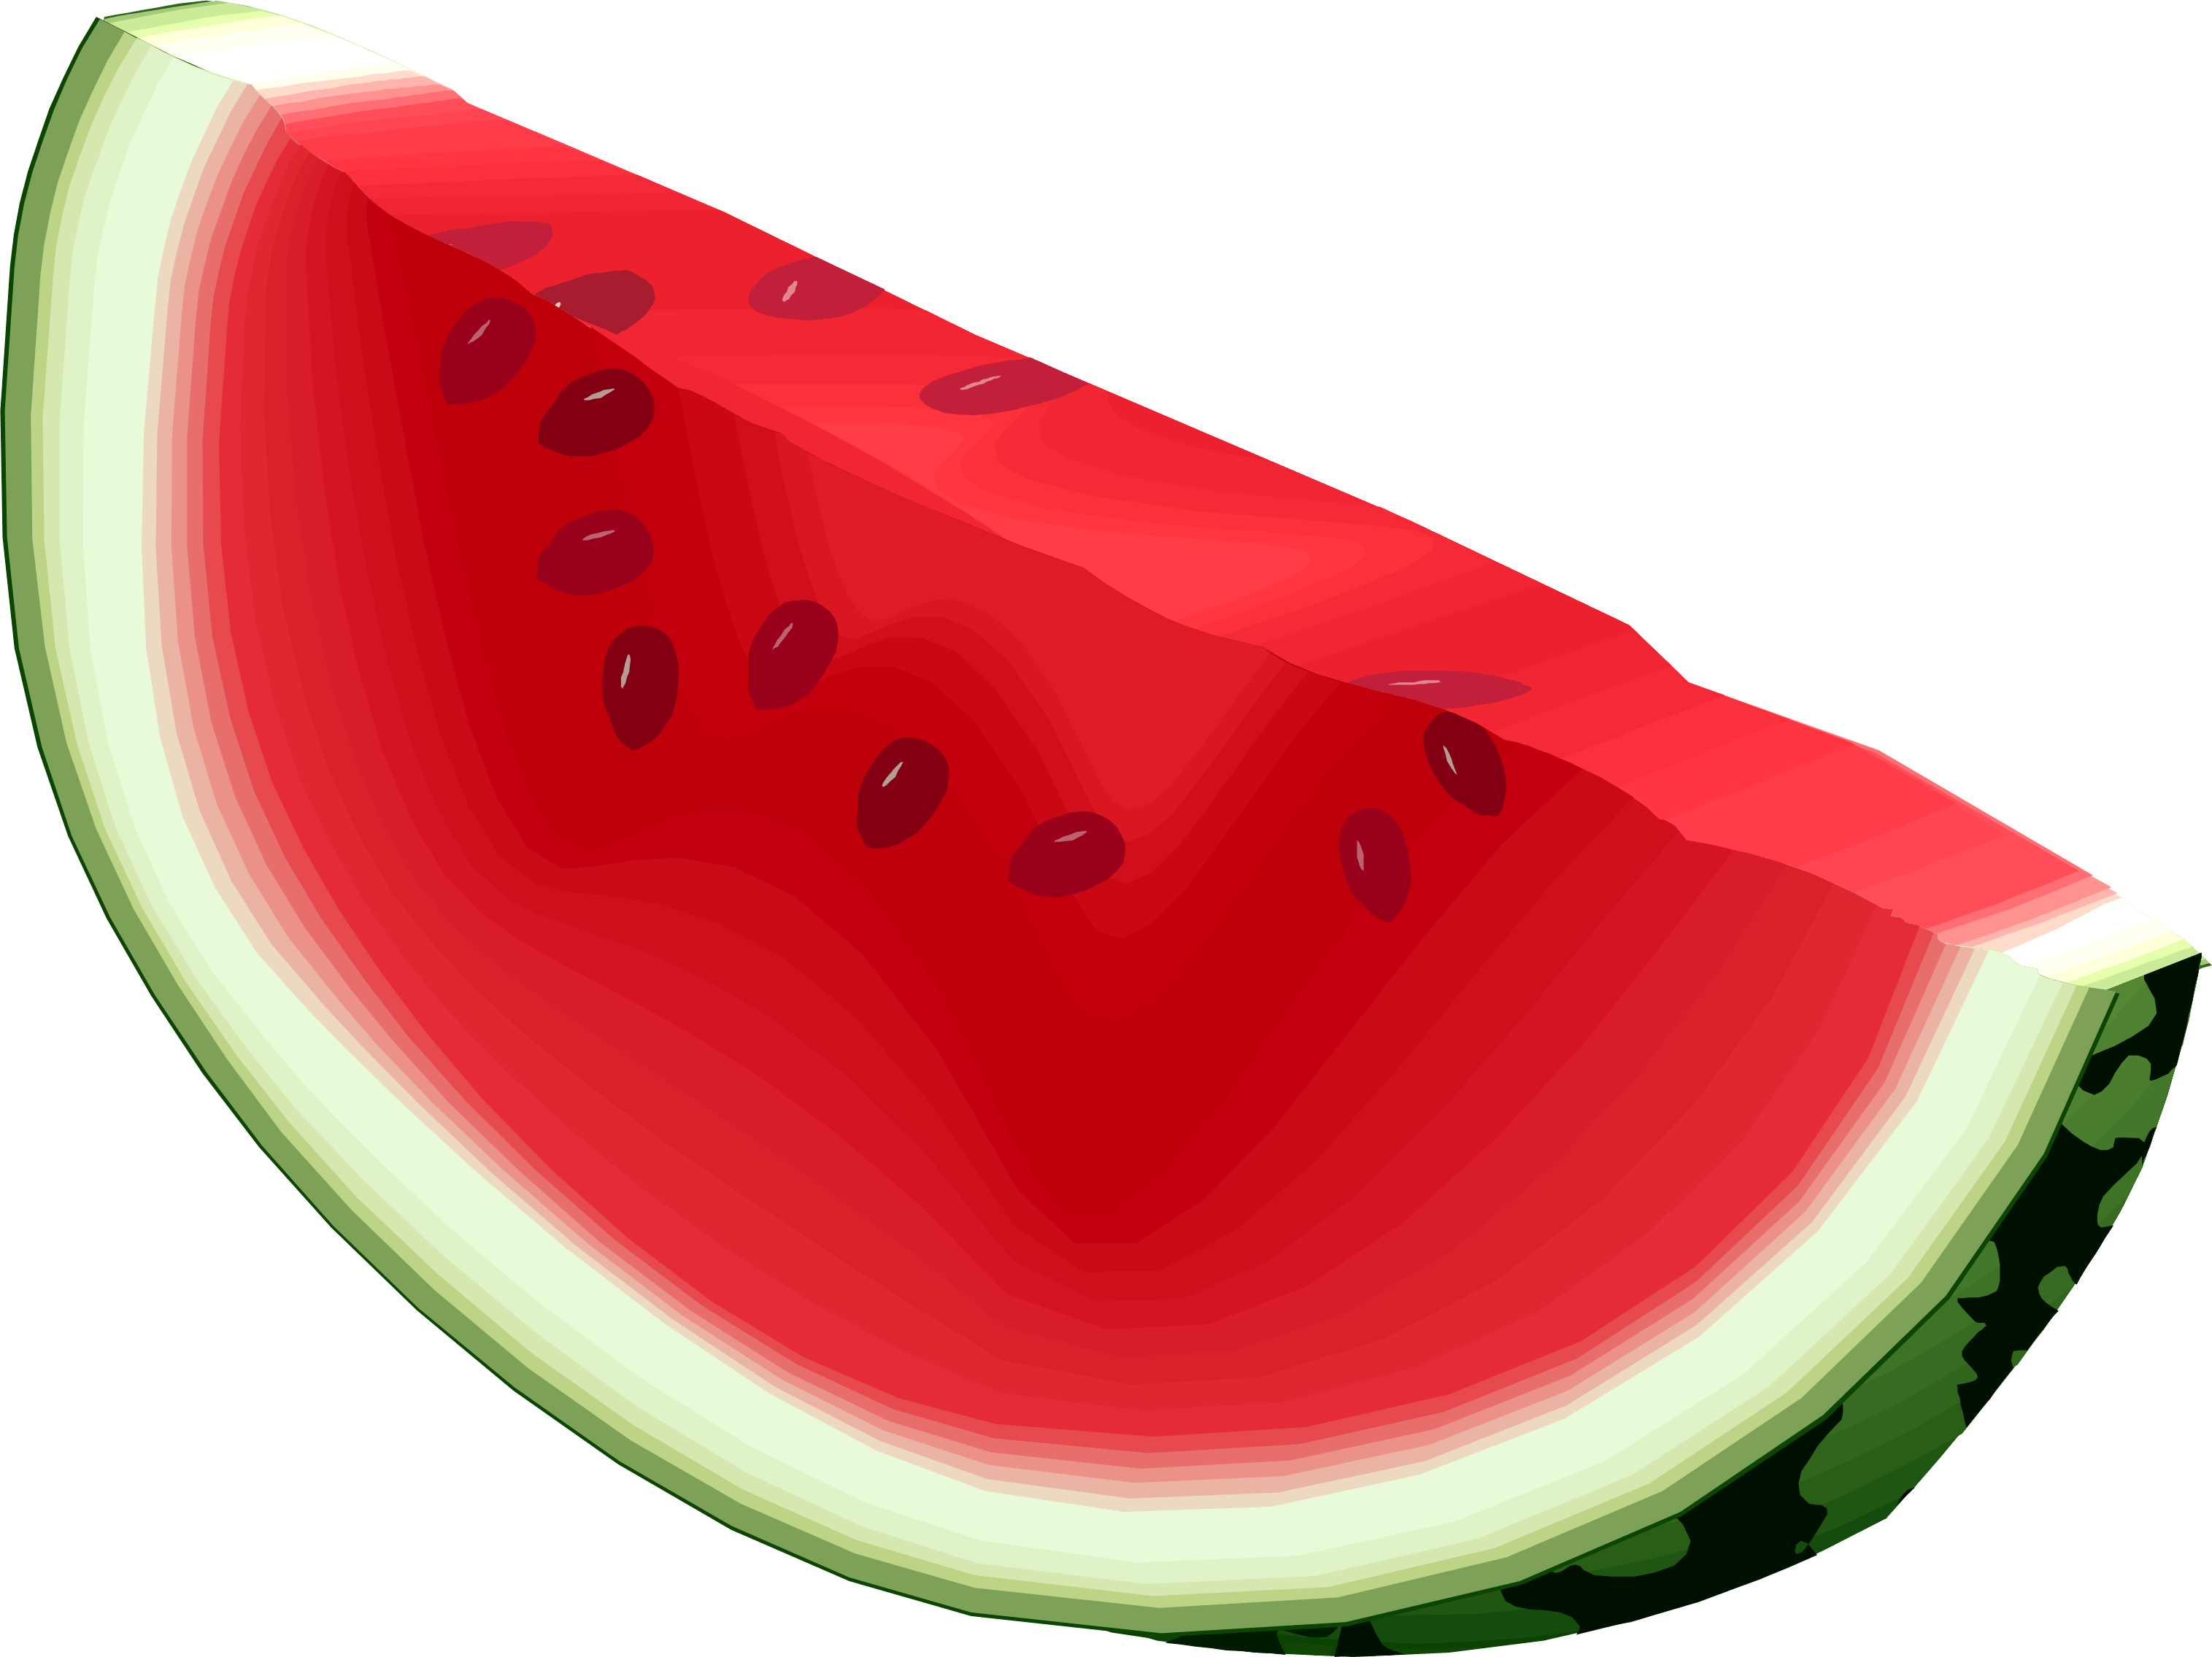 Watermelon clipart red watermelon. Download png image hq